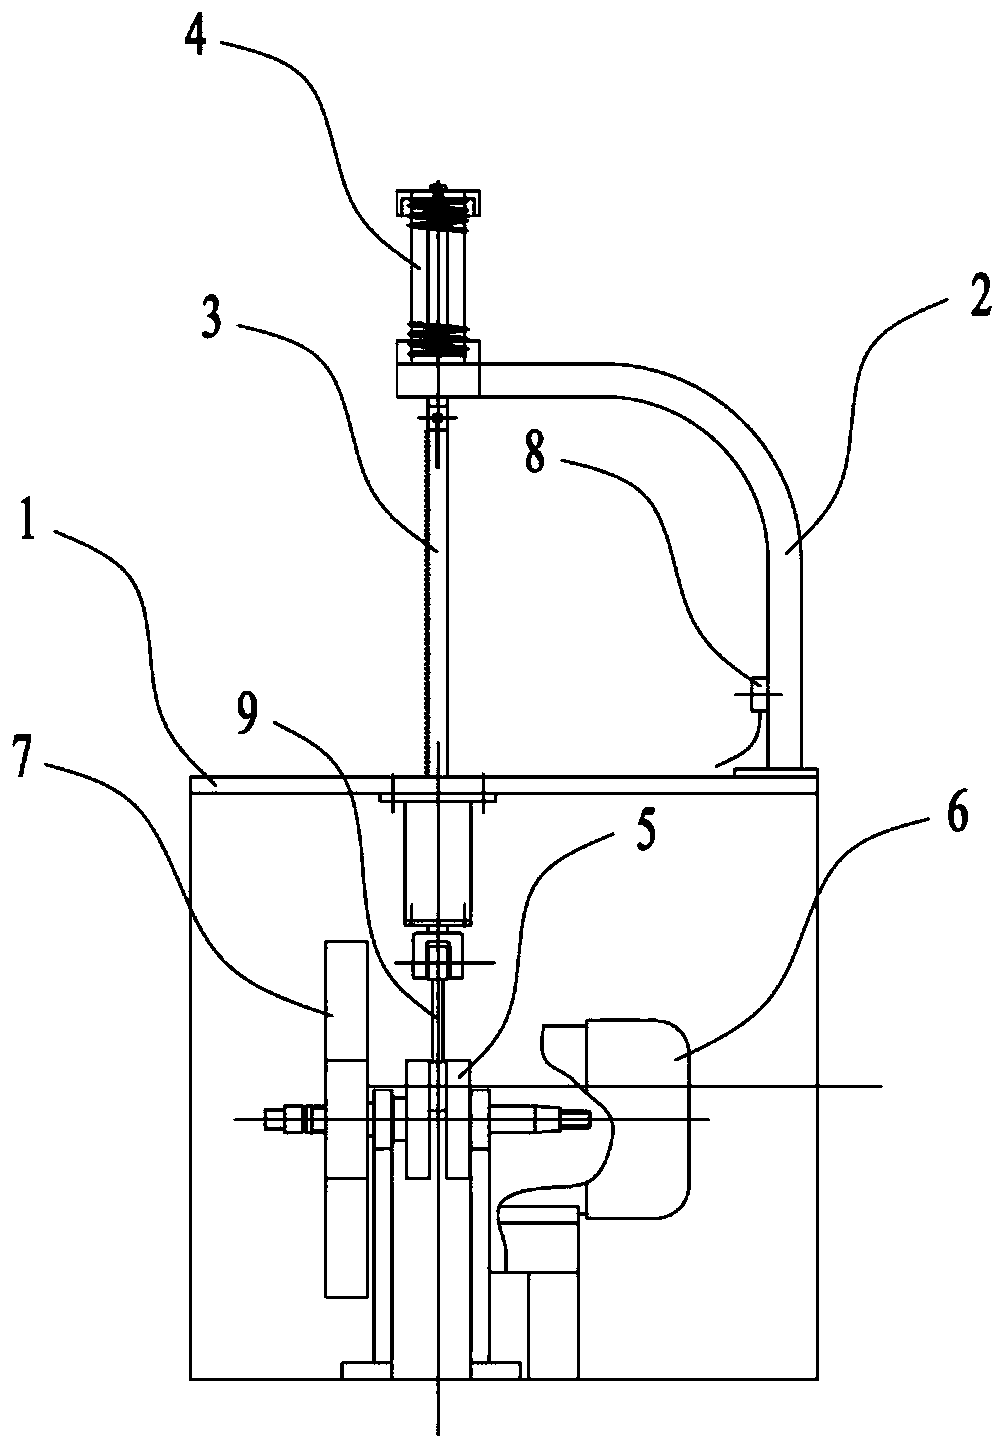 Spring reciprocating cutting device